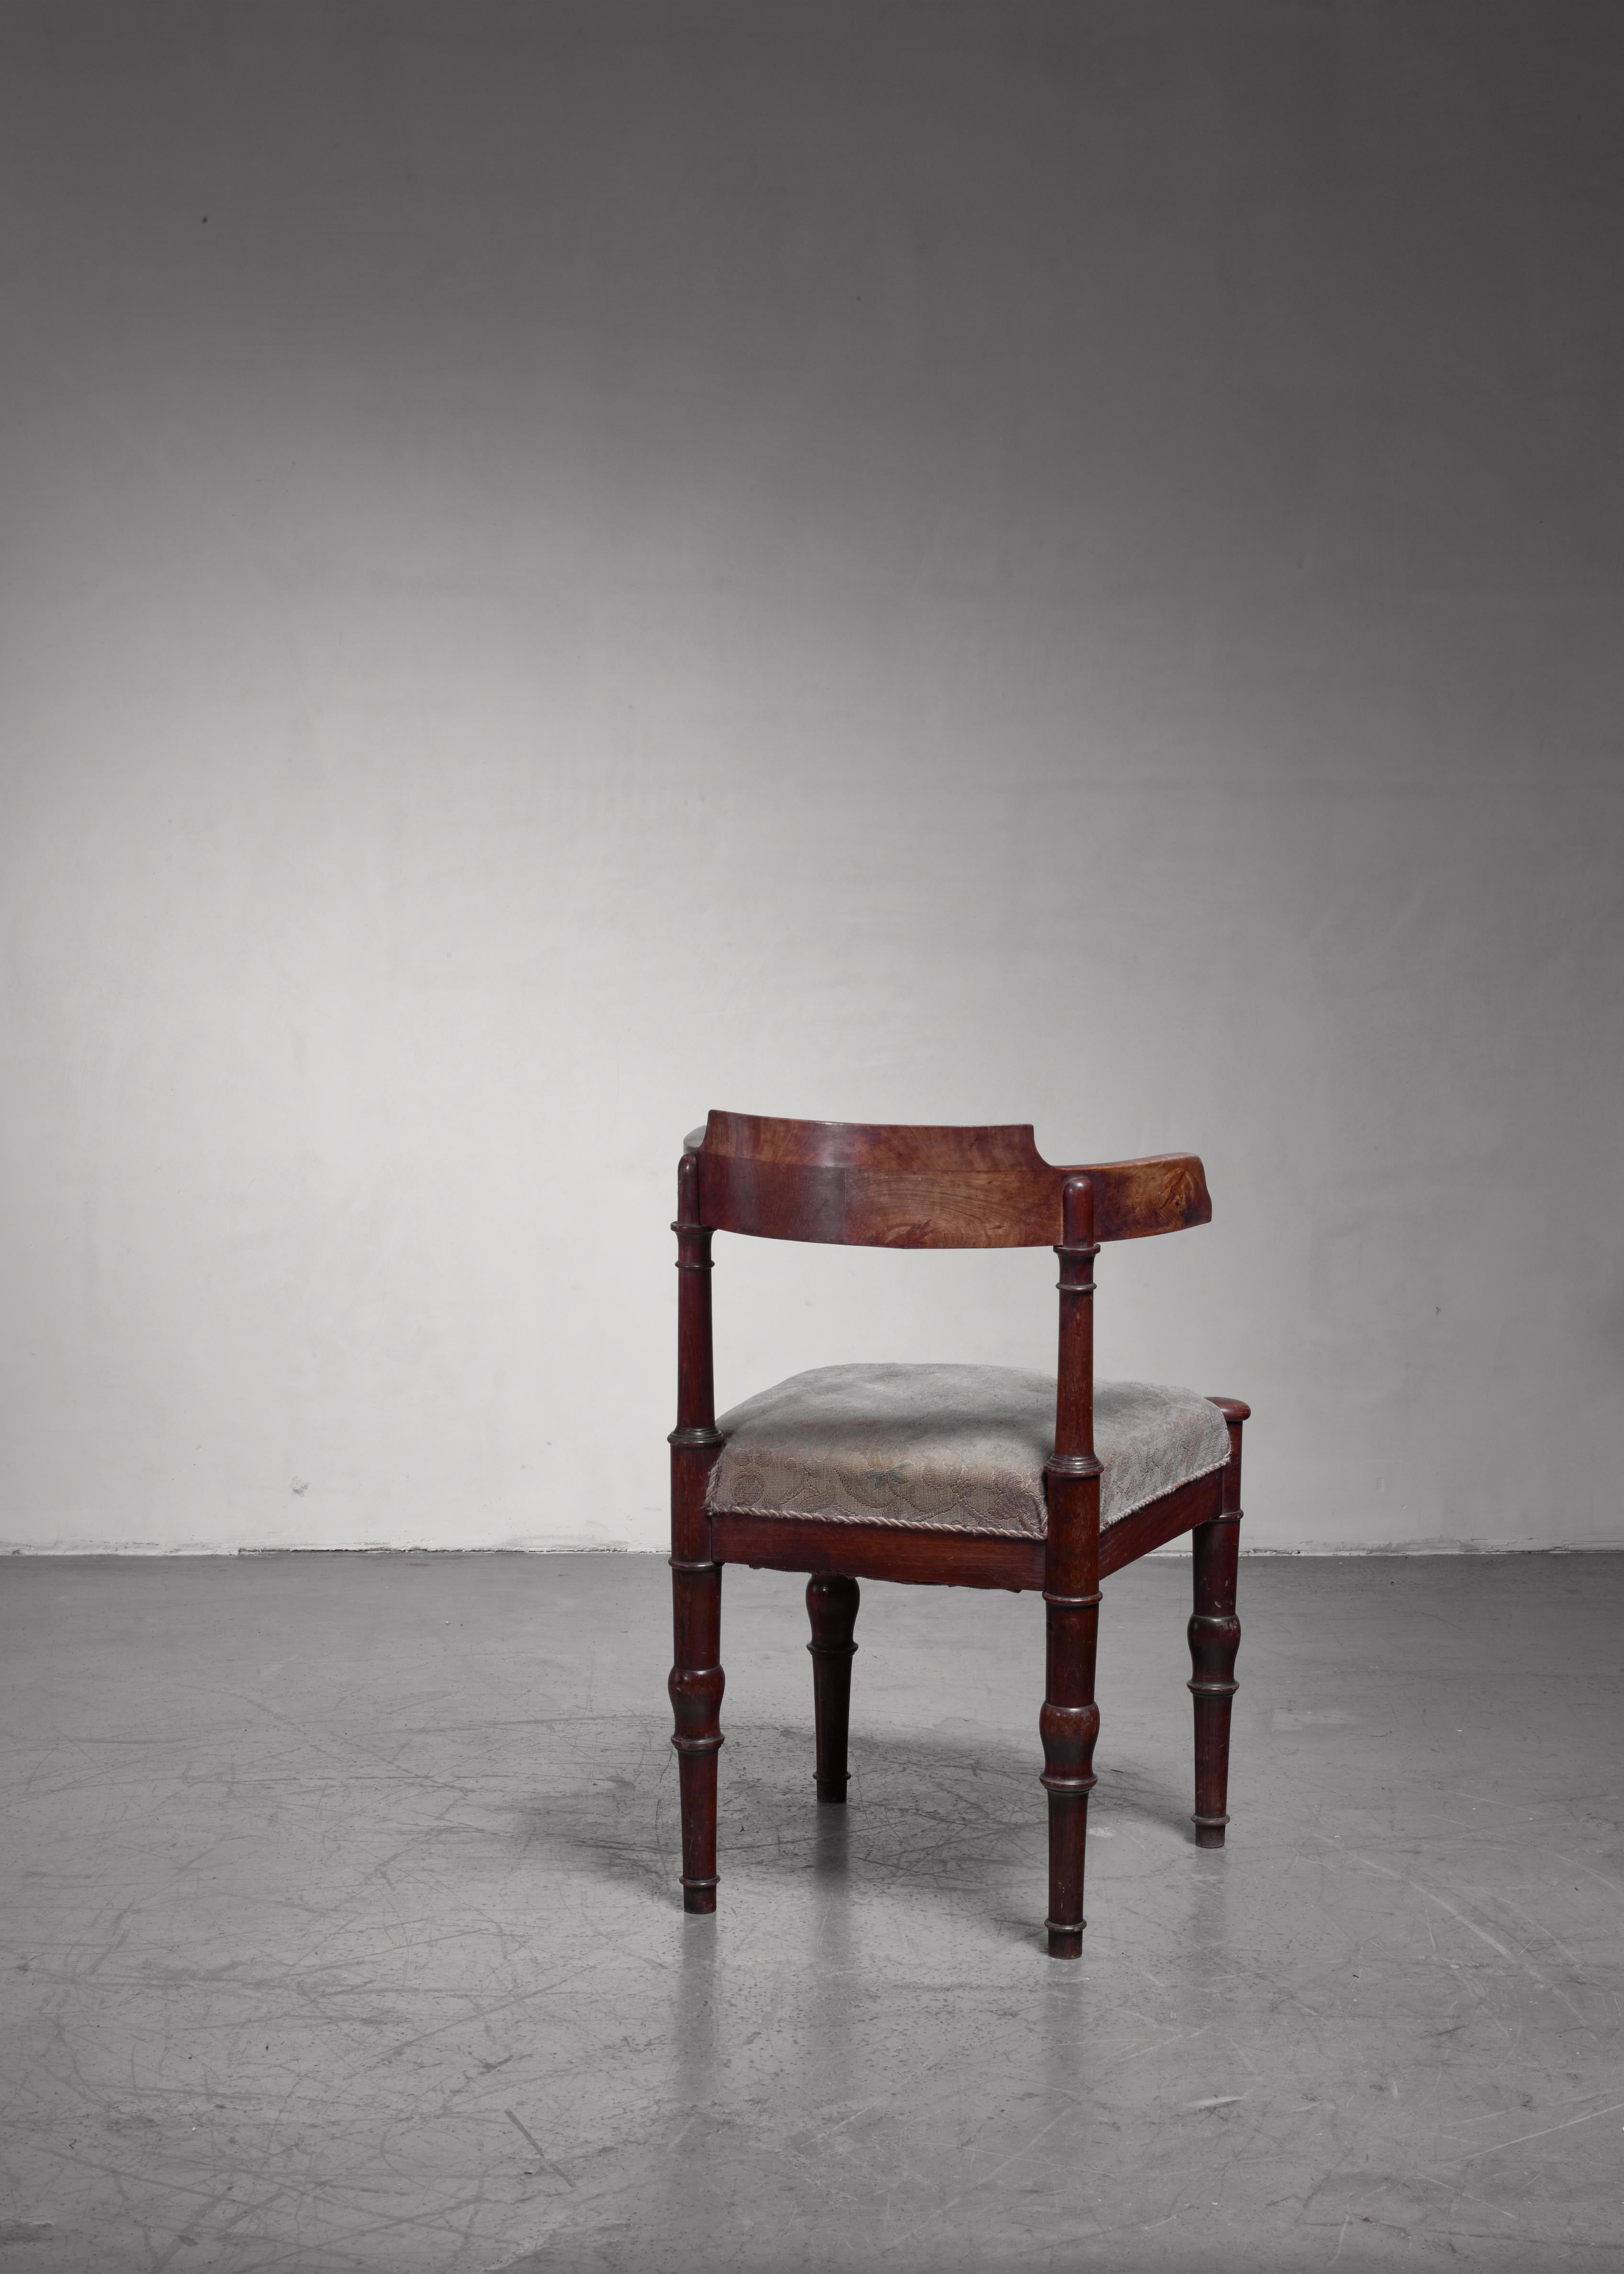 An early 20th century Danish artist chair made of stained beech with a seat upholstered with patterned fabric. The chair has sculpted feet and a wonderful, curved backrest.